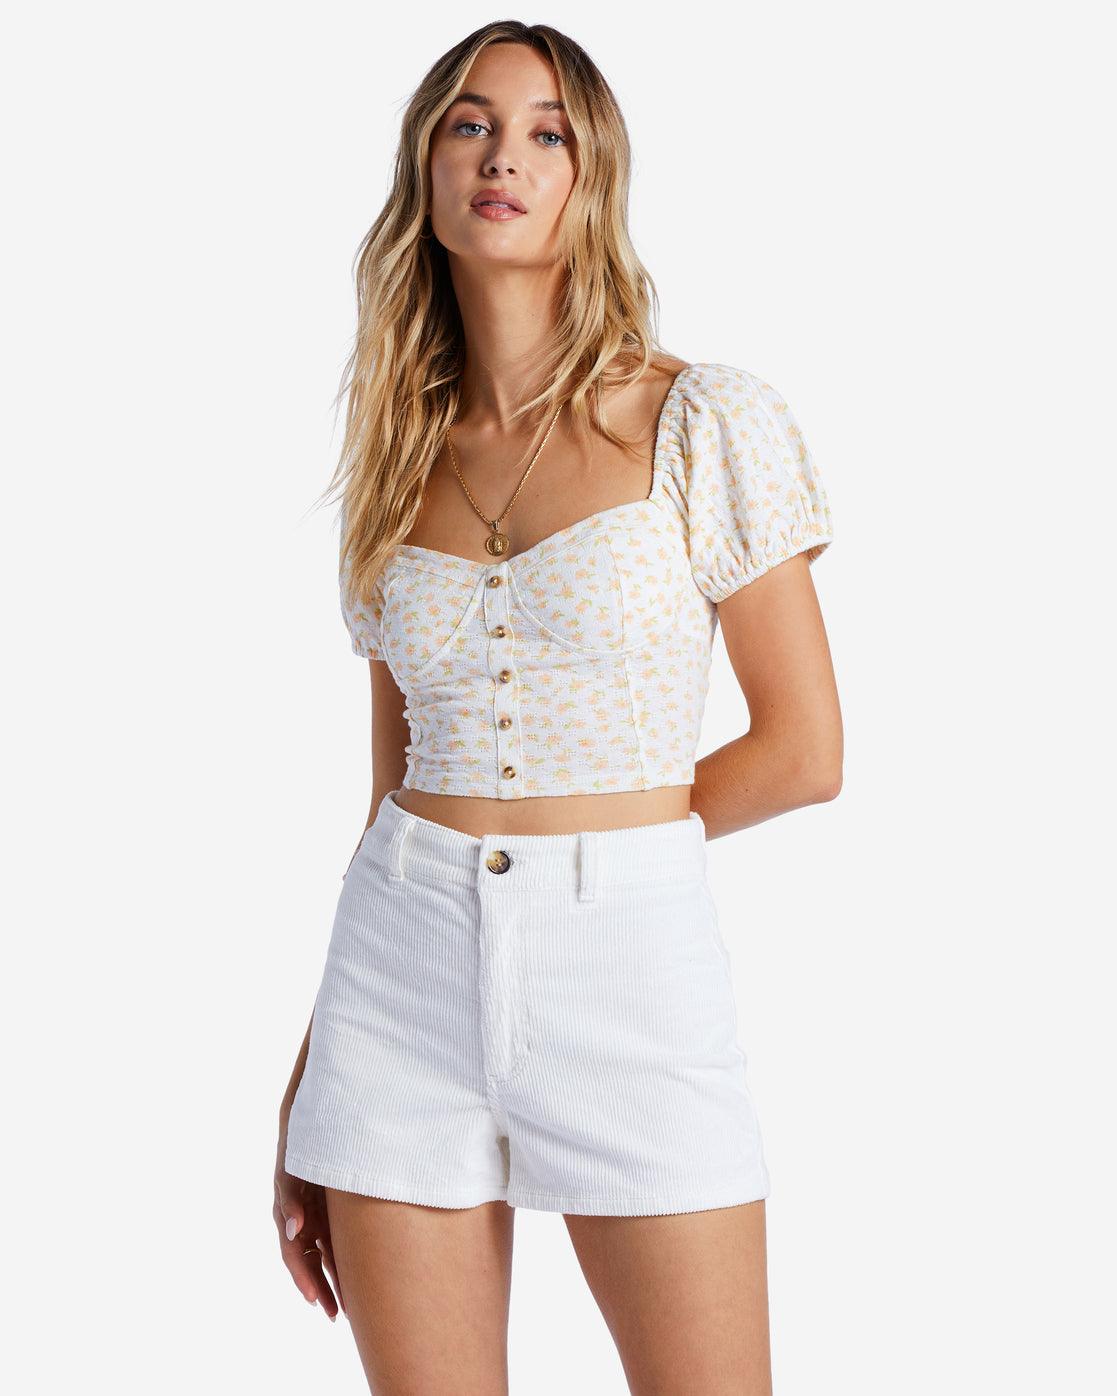 Sweet Memory Knitted Top - SoHa Surf Shop